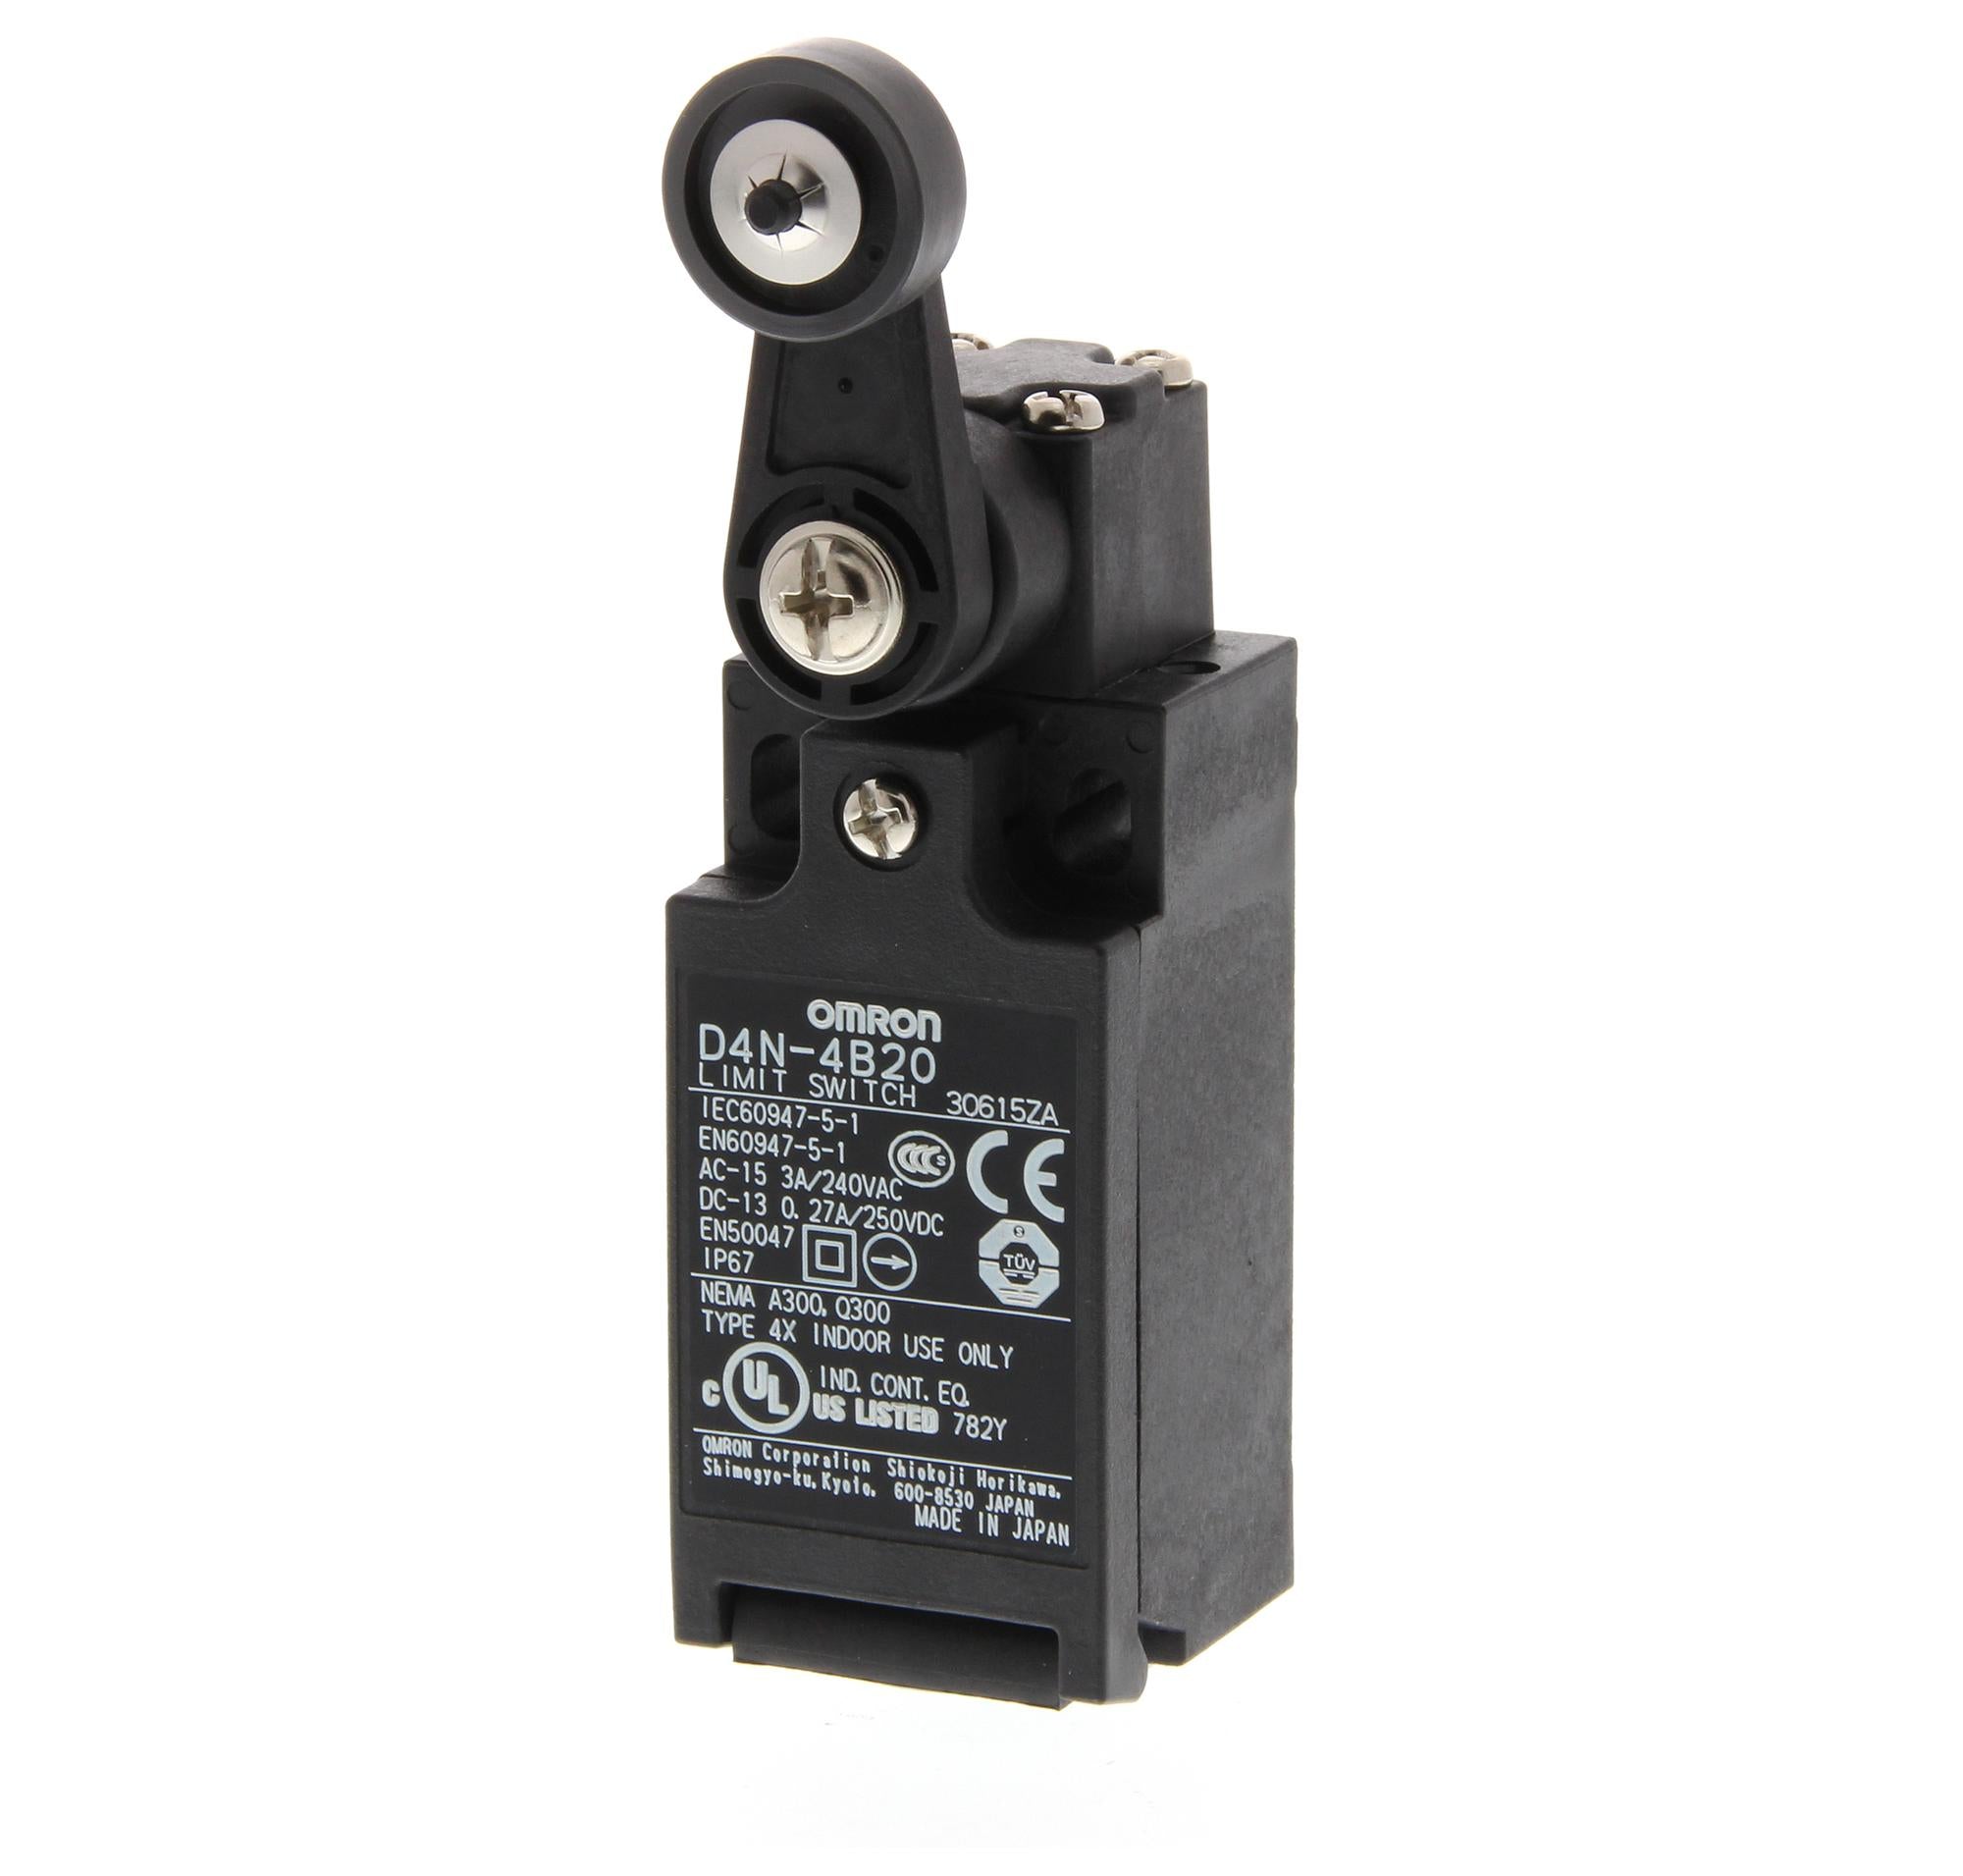 D4N-4B20 LIMIT SWITCH SWITCHES OMRON